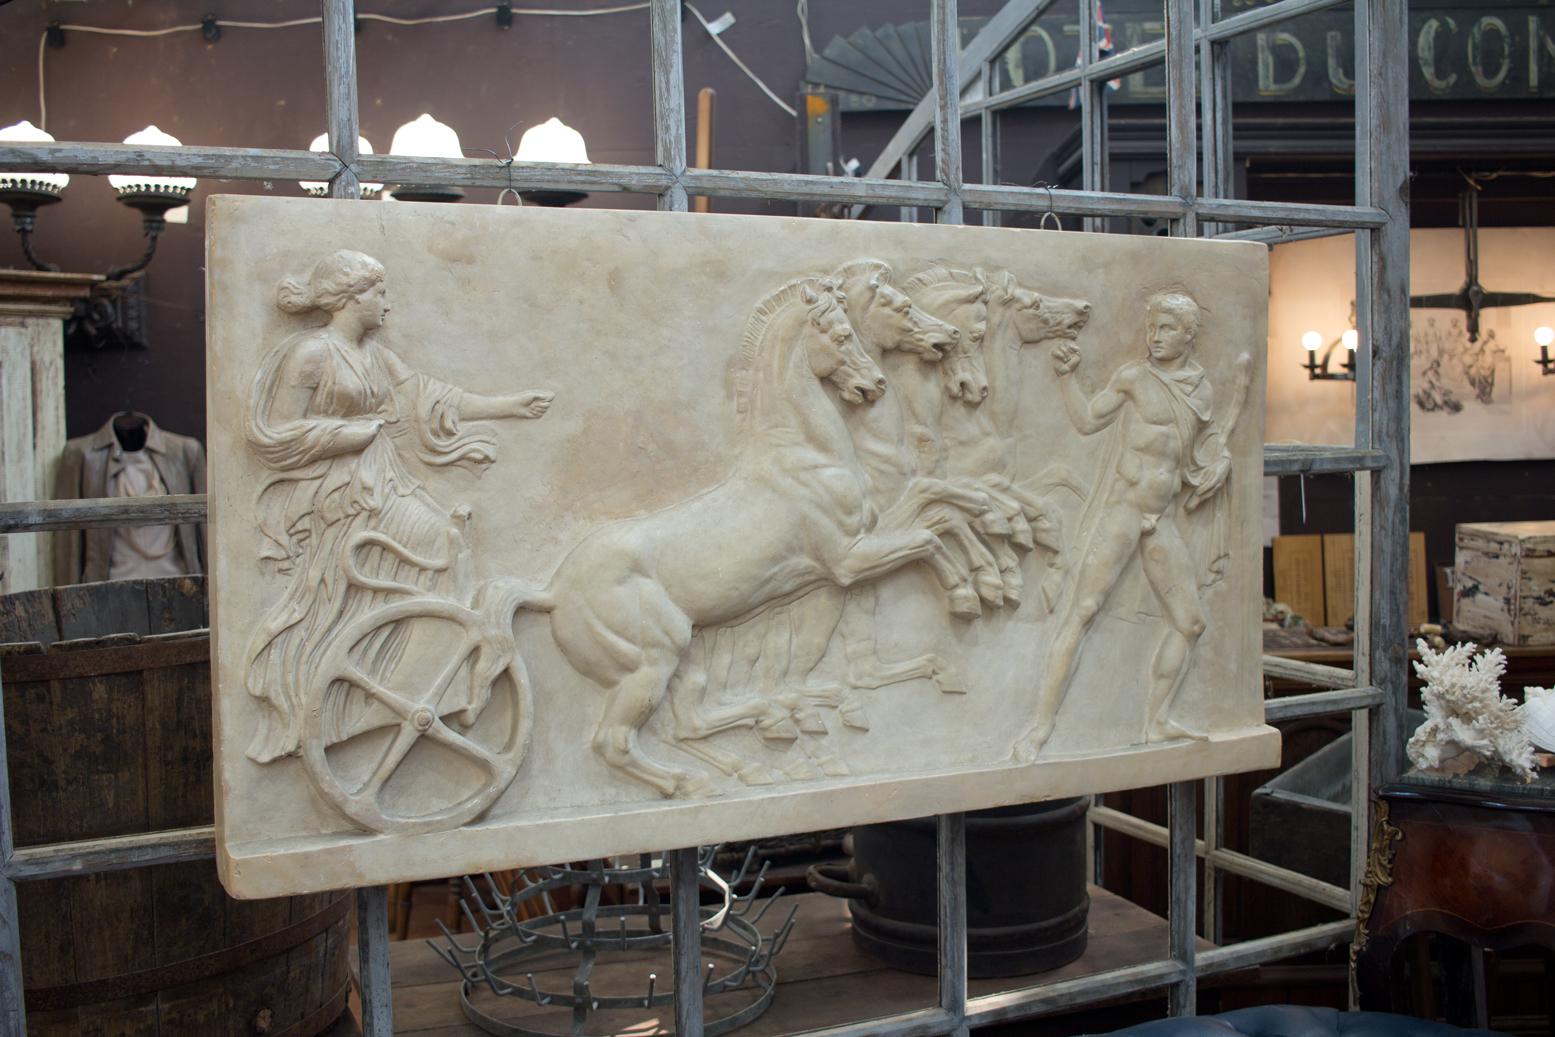 Substantial stunning vintage bas relief replica from the Louvre, Paris (disk on back). It depicts Eos, the goddess of dawn, driving her quadriga chariot. Her lover (Tithonus) is at the horses’ heads. The original 1st century marble Herculaneum is in